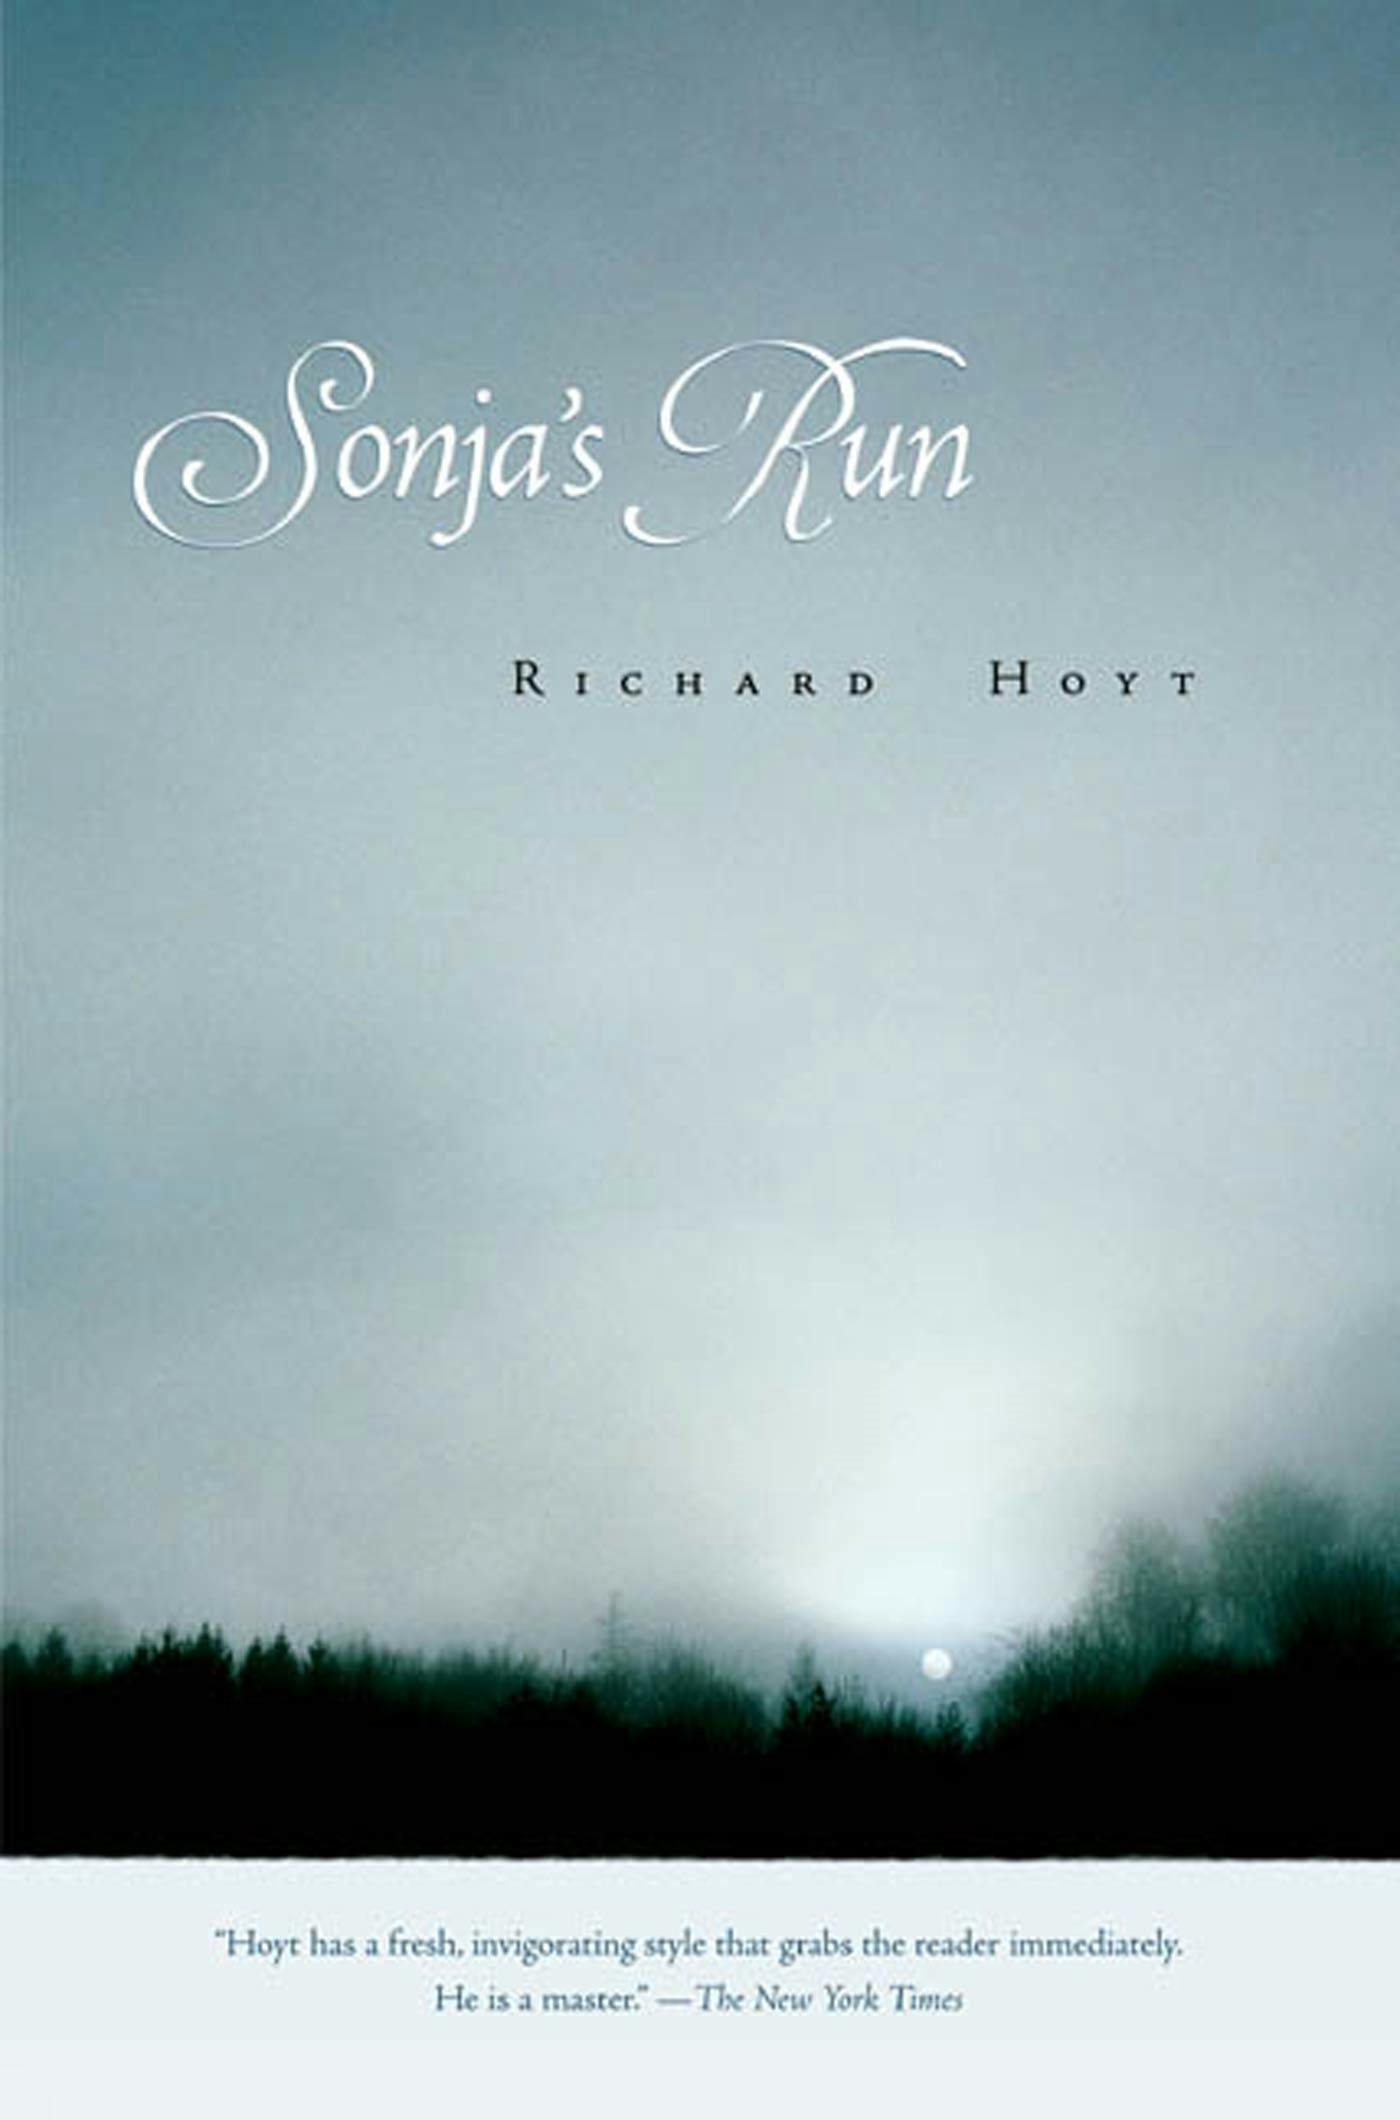 Cover for the book titled as: Sonja's Run